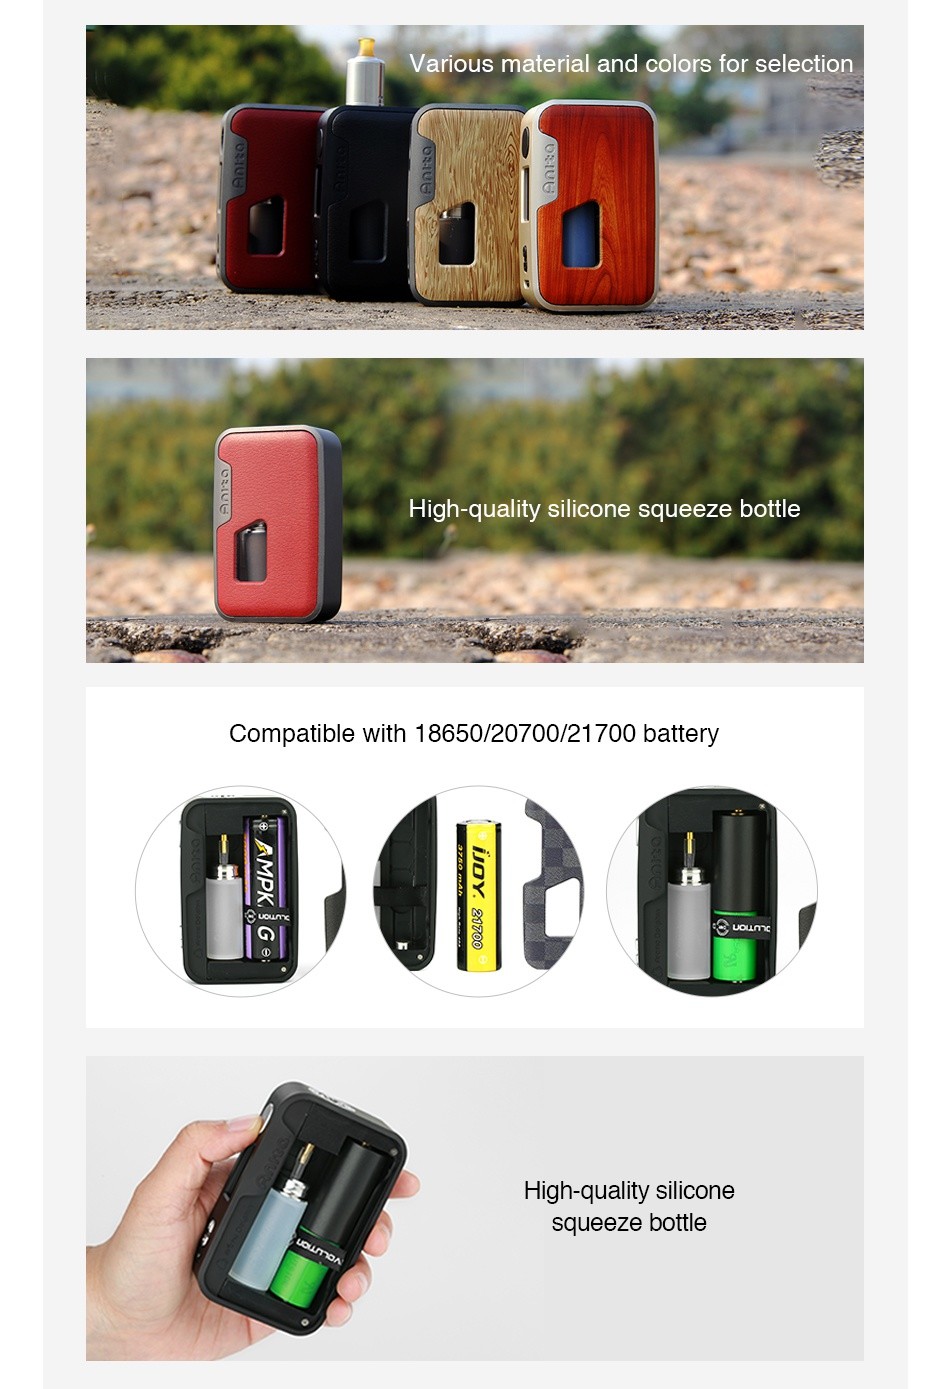 Arctic Dolphin Anita 100W Squonk TC MOD TPD Edition Silver frame Brownish Black Yellow Black Red Blue Red leather Leathe Wood grain Square Wood grain Leathe